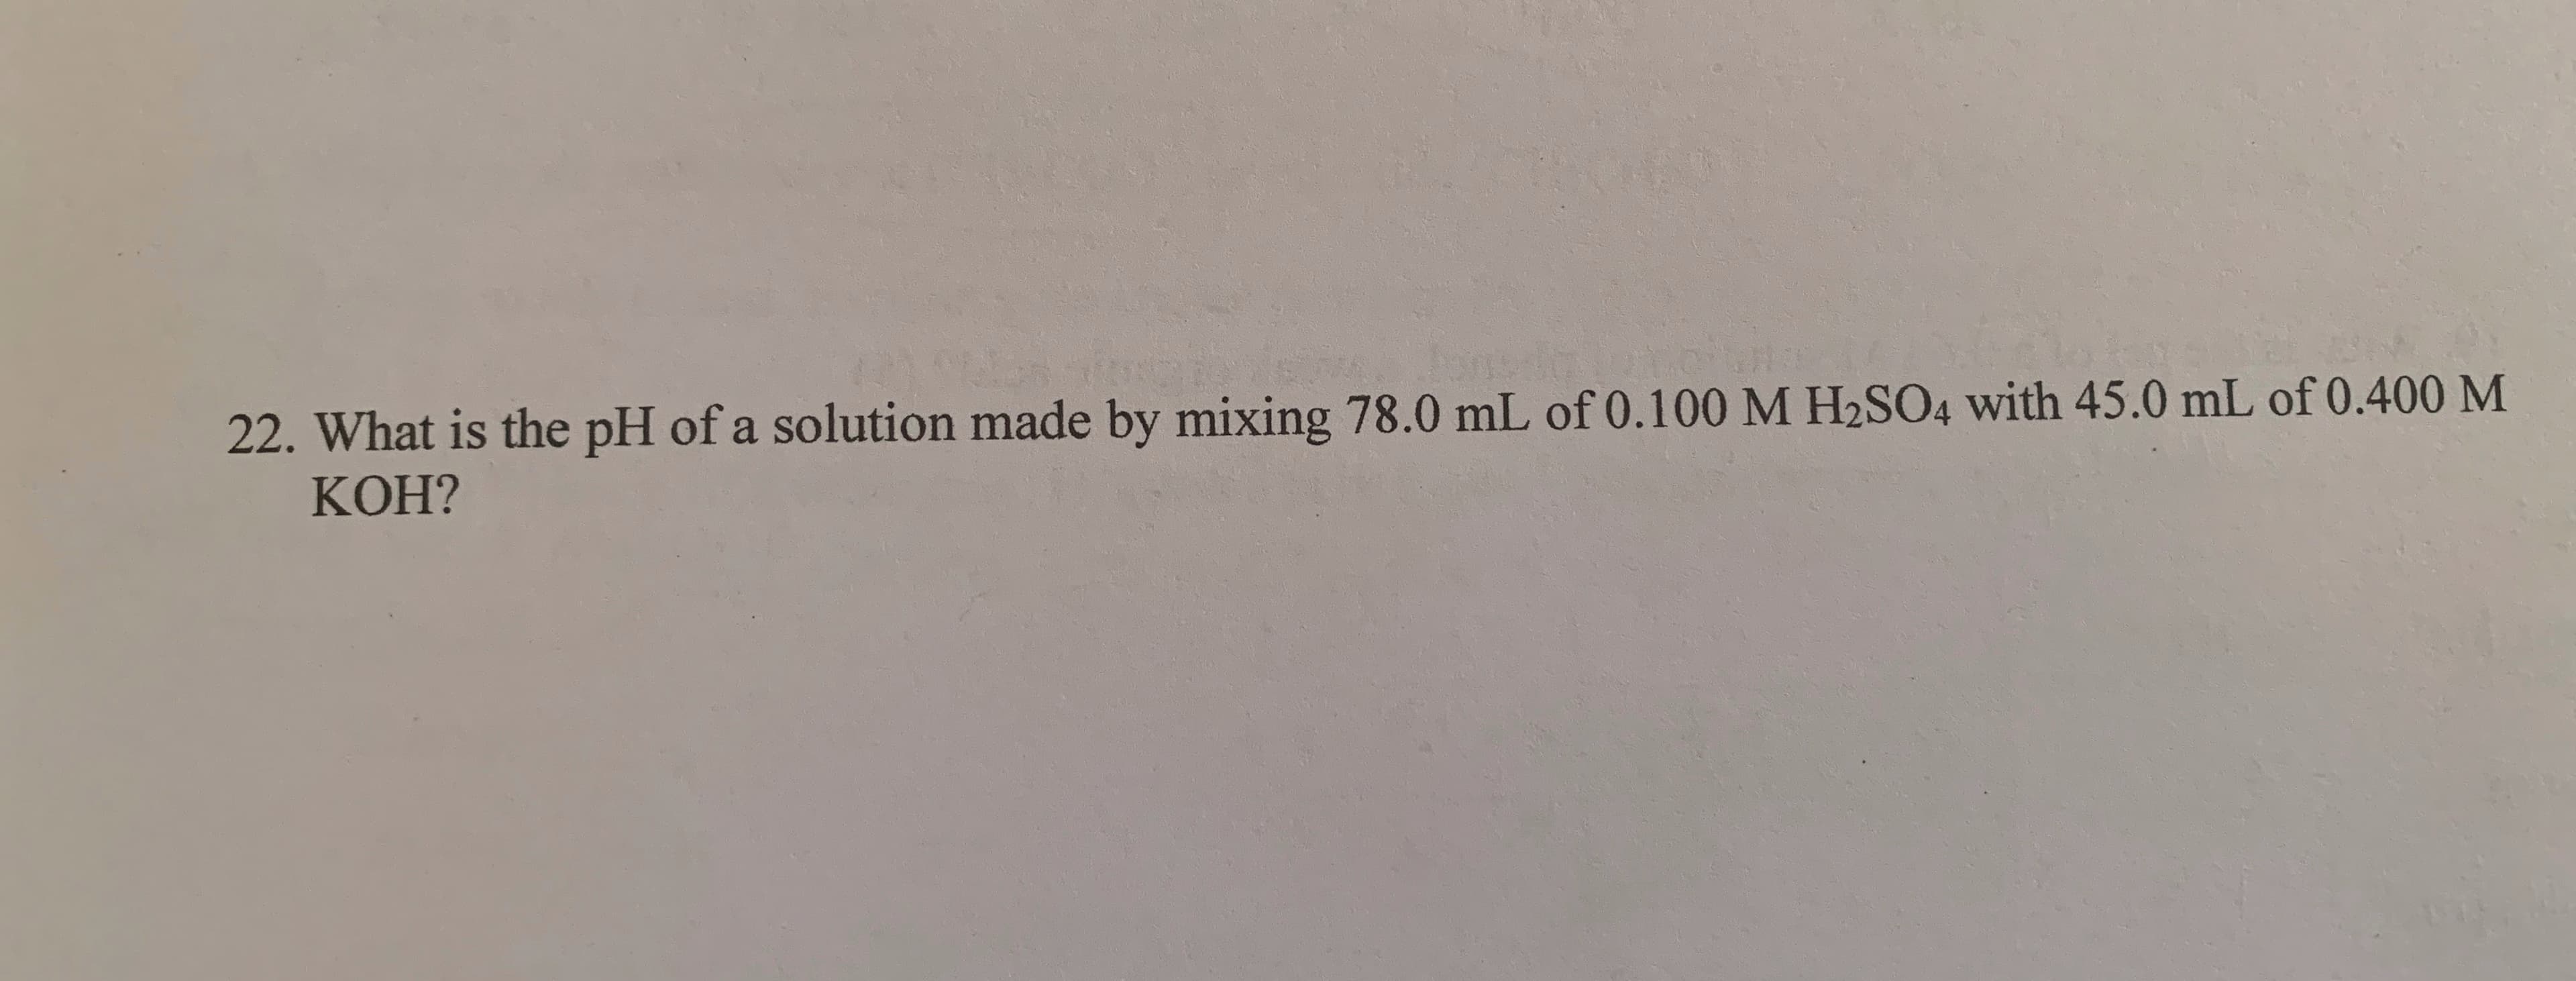 What is the pH of a solution made by mixing 78.0 mL of 0.100 M H2SO4 with 45.0 mL of 0.400 M
КОН?
